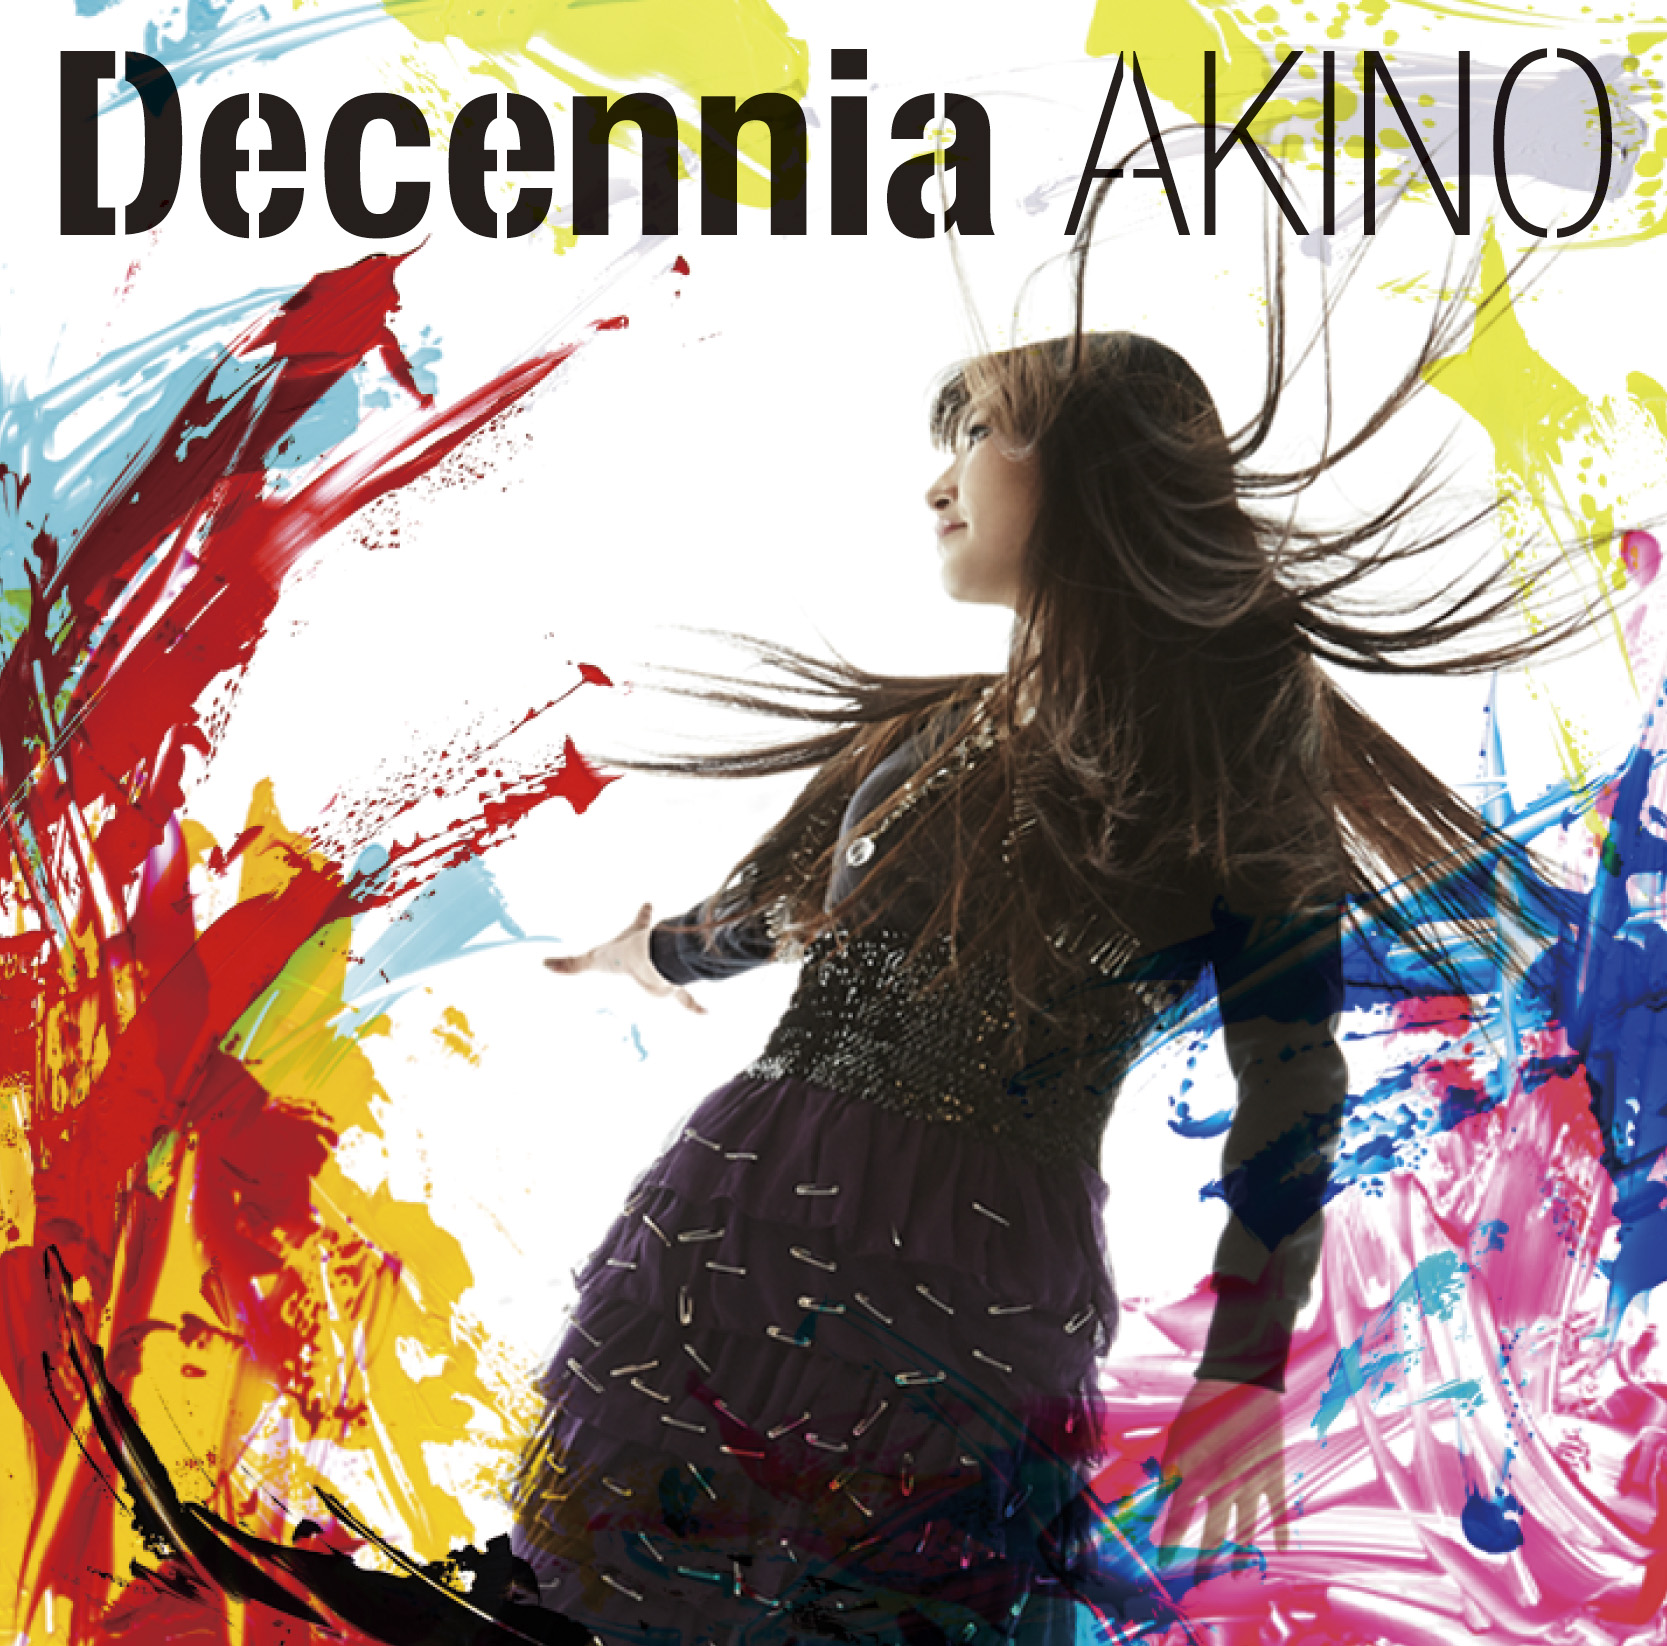 AKINO with bless4『Decennia』レビュー - 画像一覧（2/2）